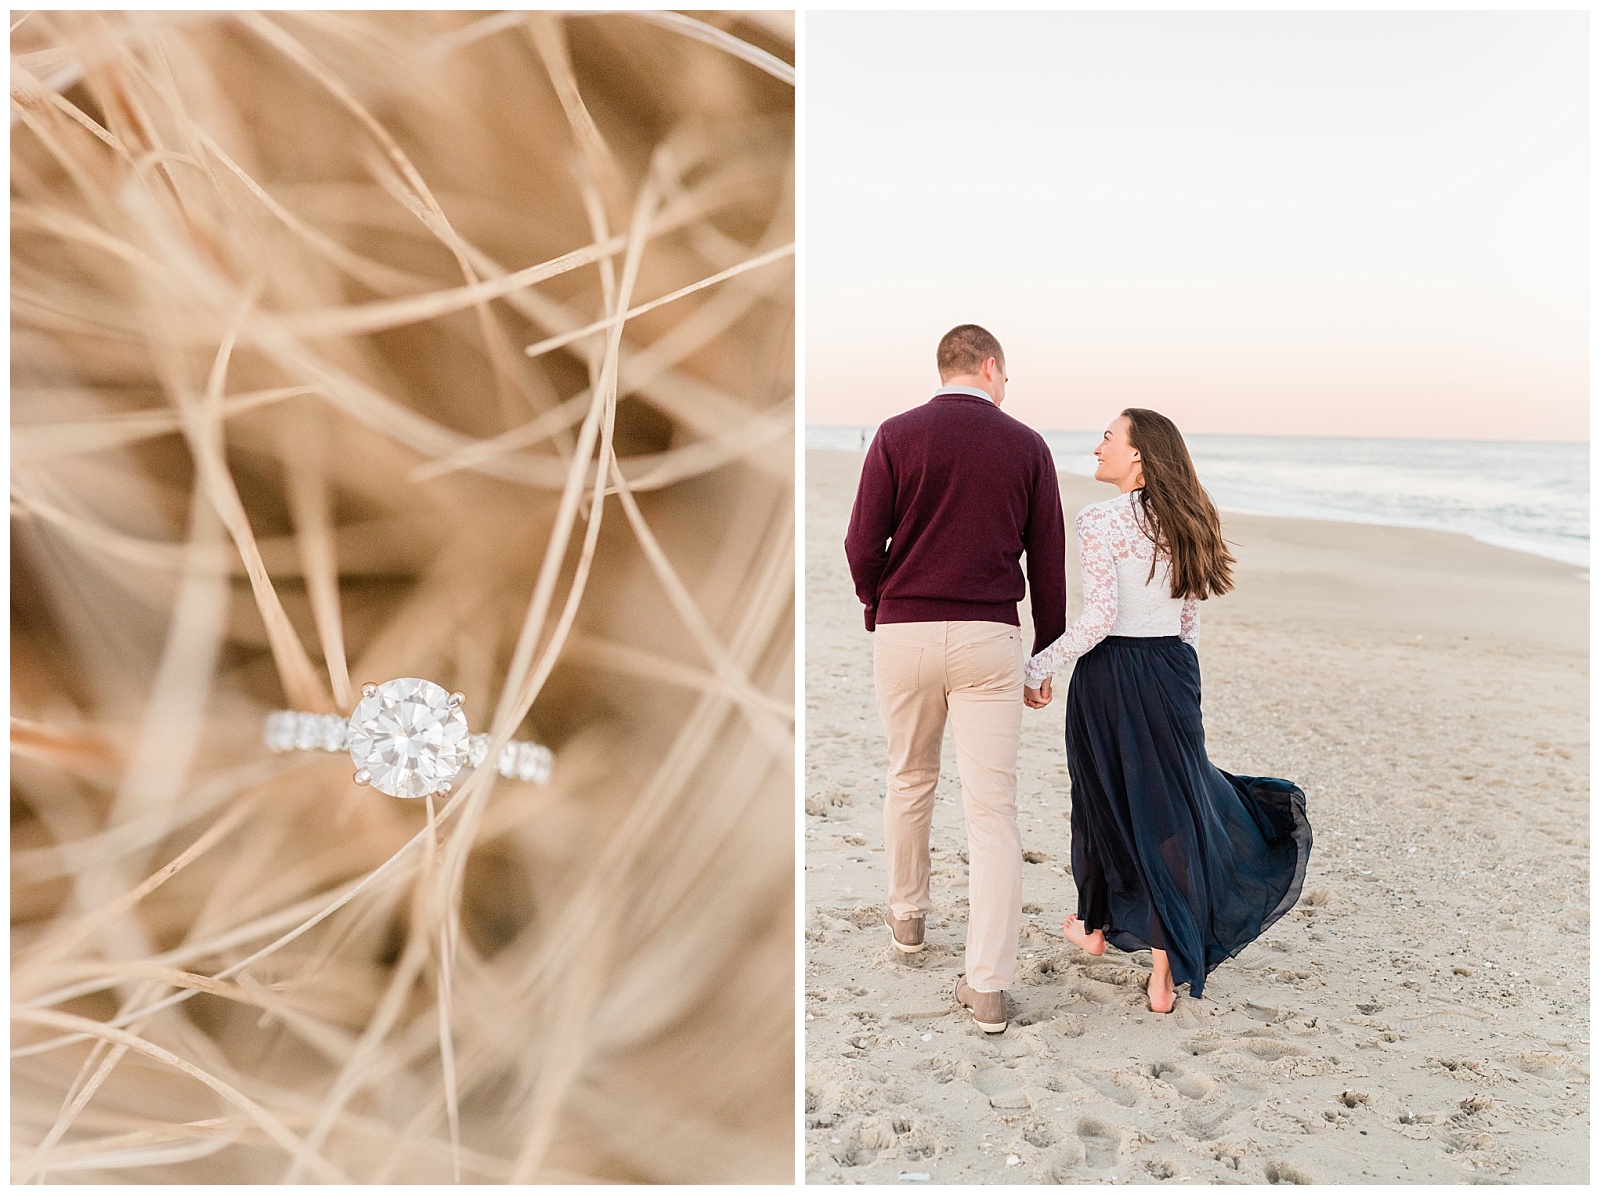 New Jersey, Engagement Session, Wedding Photographer, Beach, Sunset, Shore, Engagement Ring, Ring